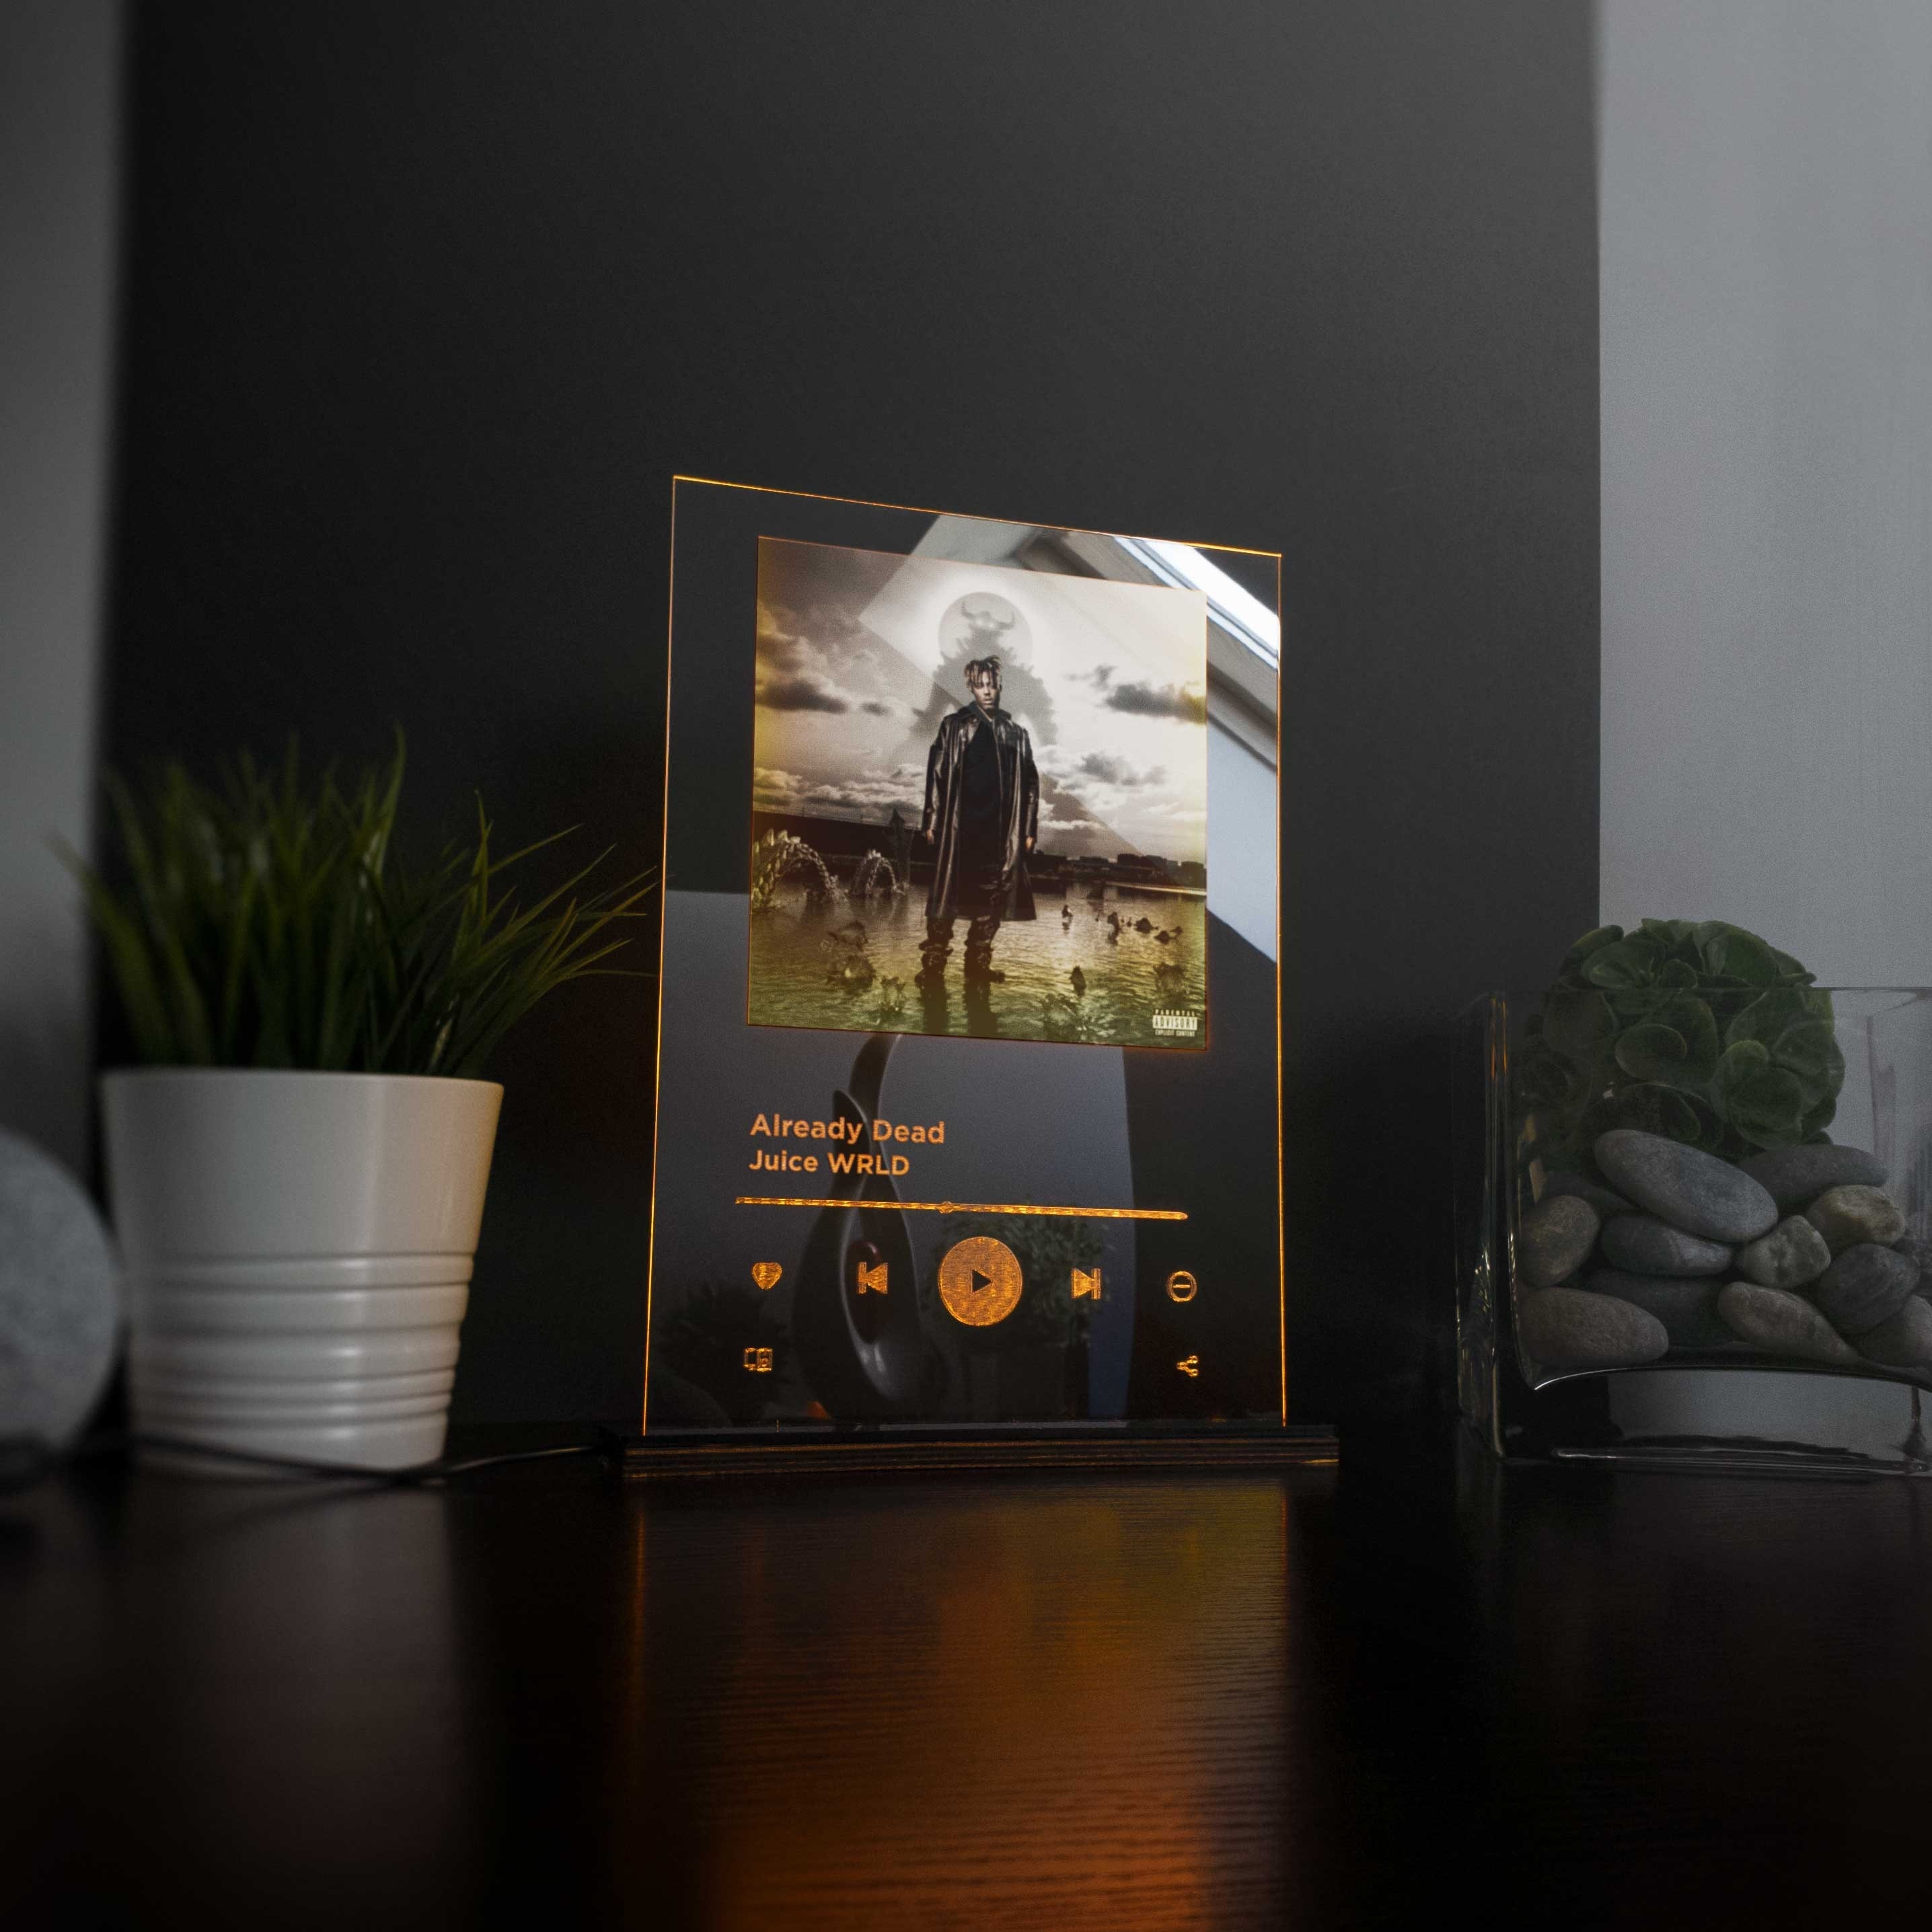 Acrylic Poster Custom Led Light Table Decor Unique Gift Idea Night Lamp Choice of any Song from this Album Apple Music or Spotify